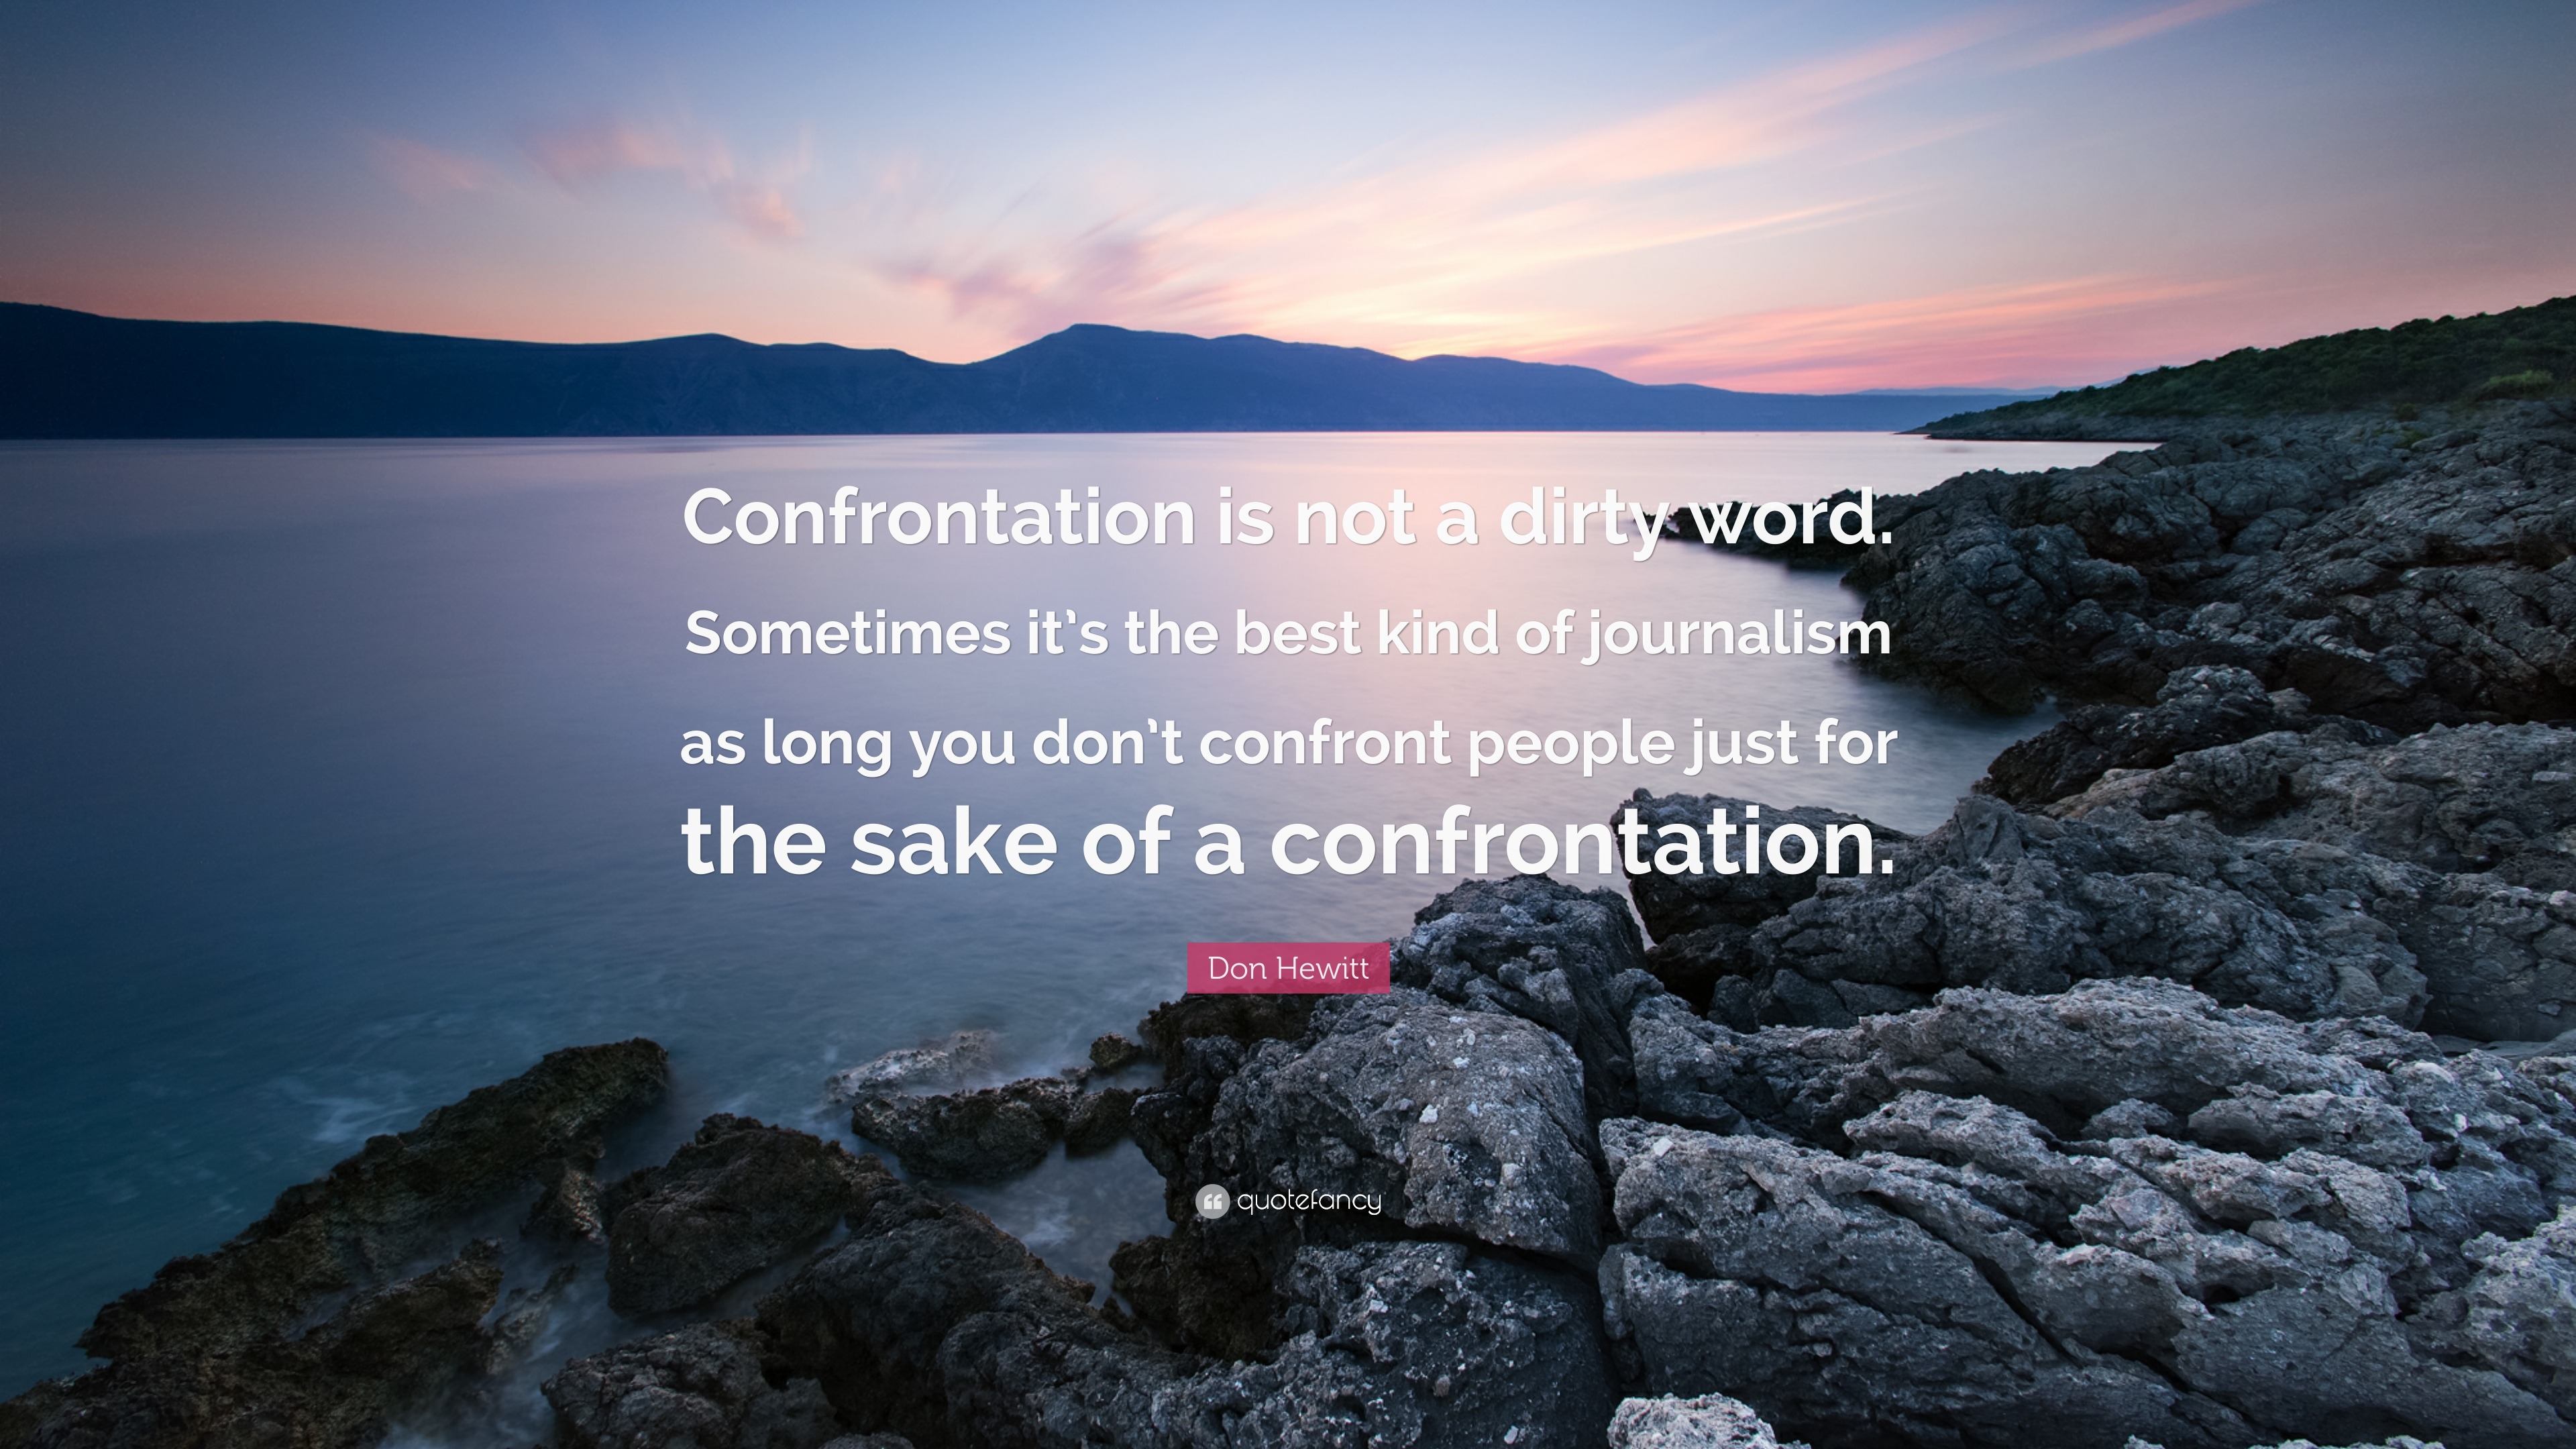 How long is Confrontation?